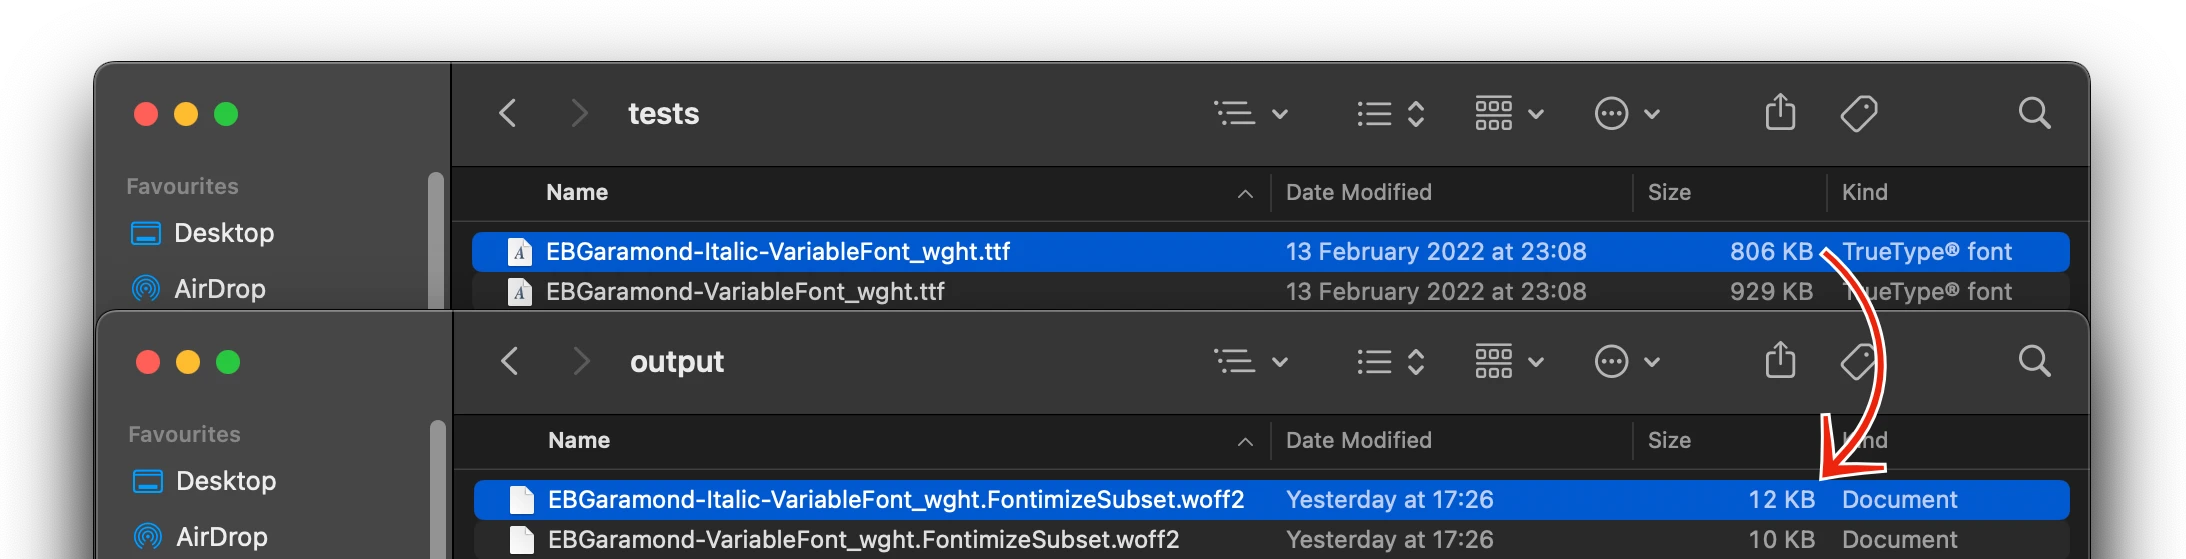 Screenshot of Finder windows with input and output fonts showing drastic decrease in font file size.